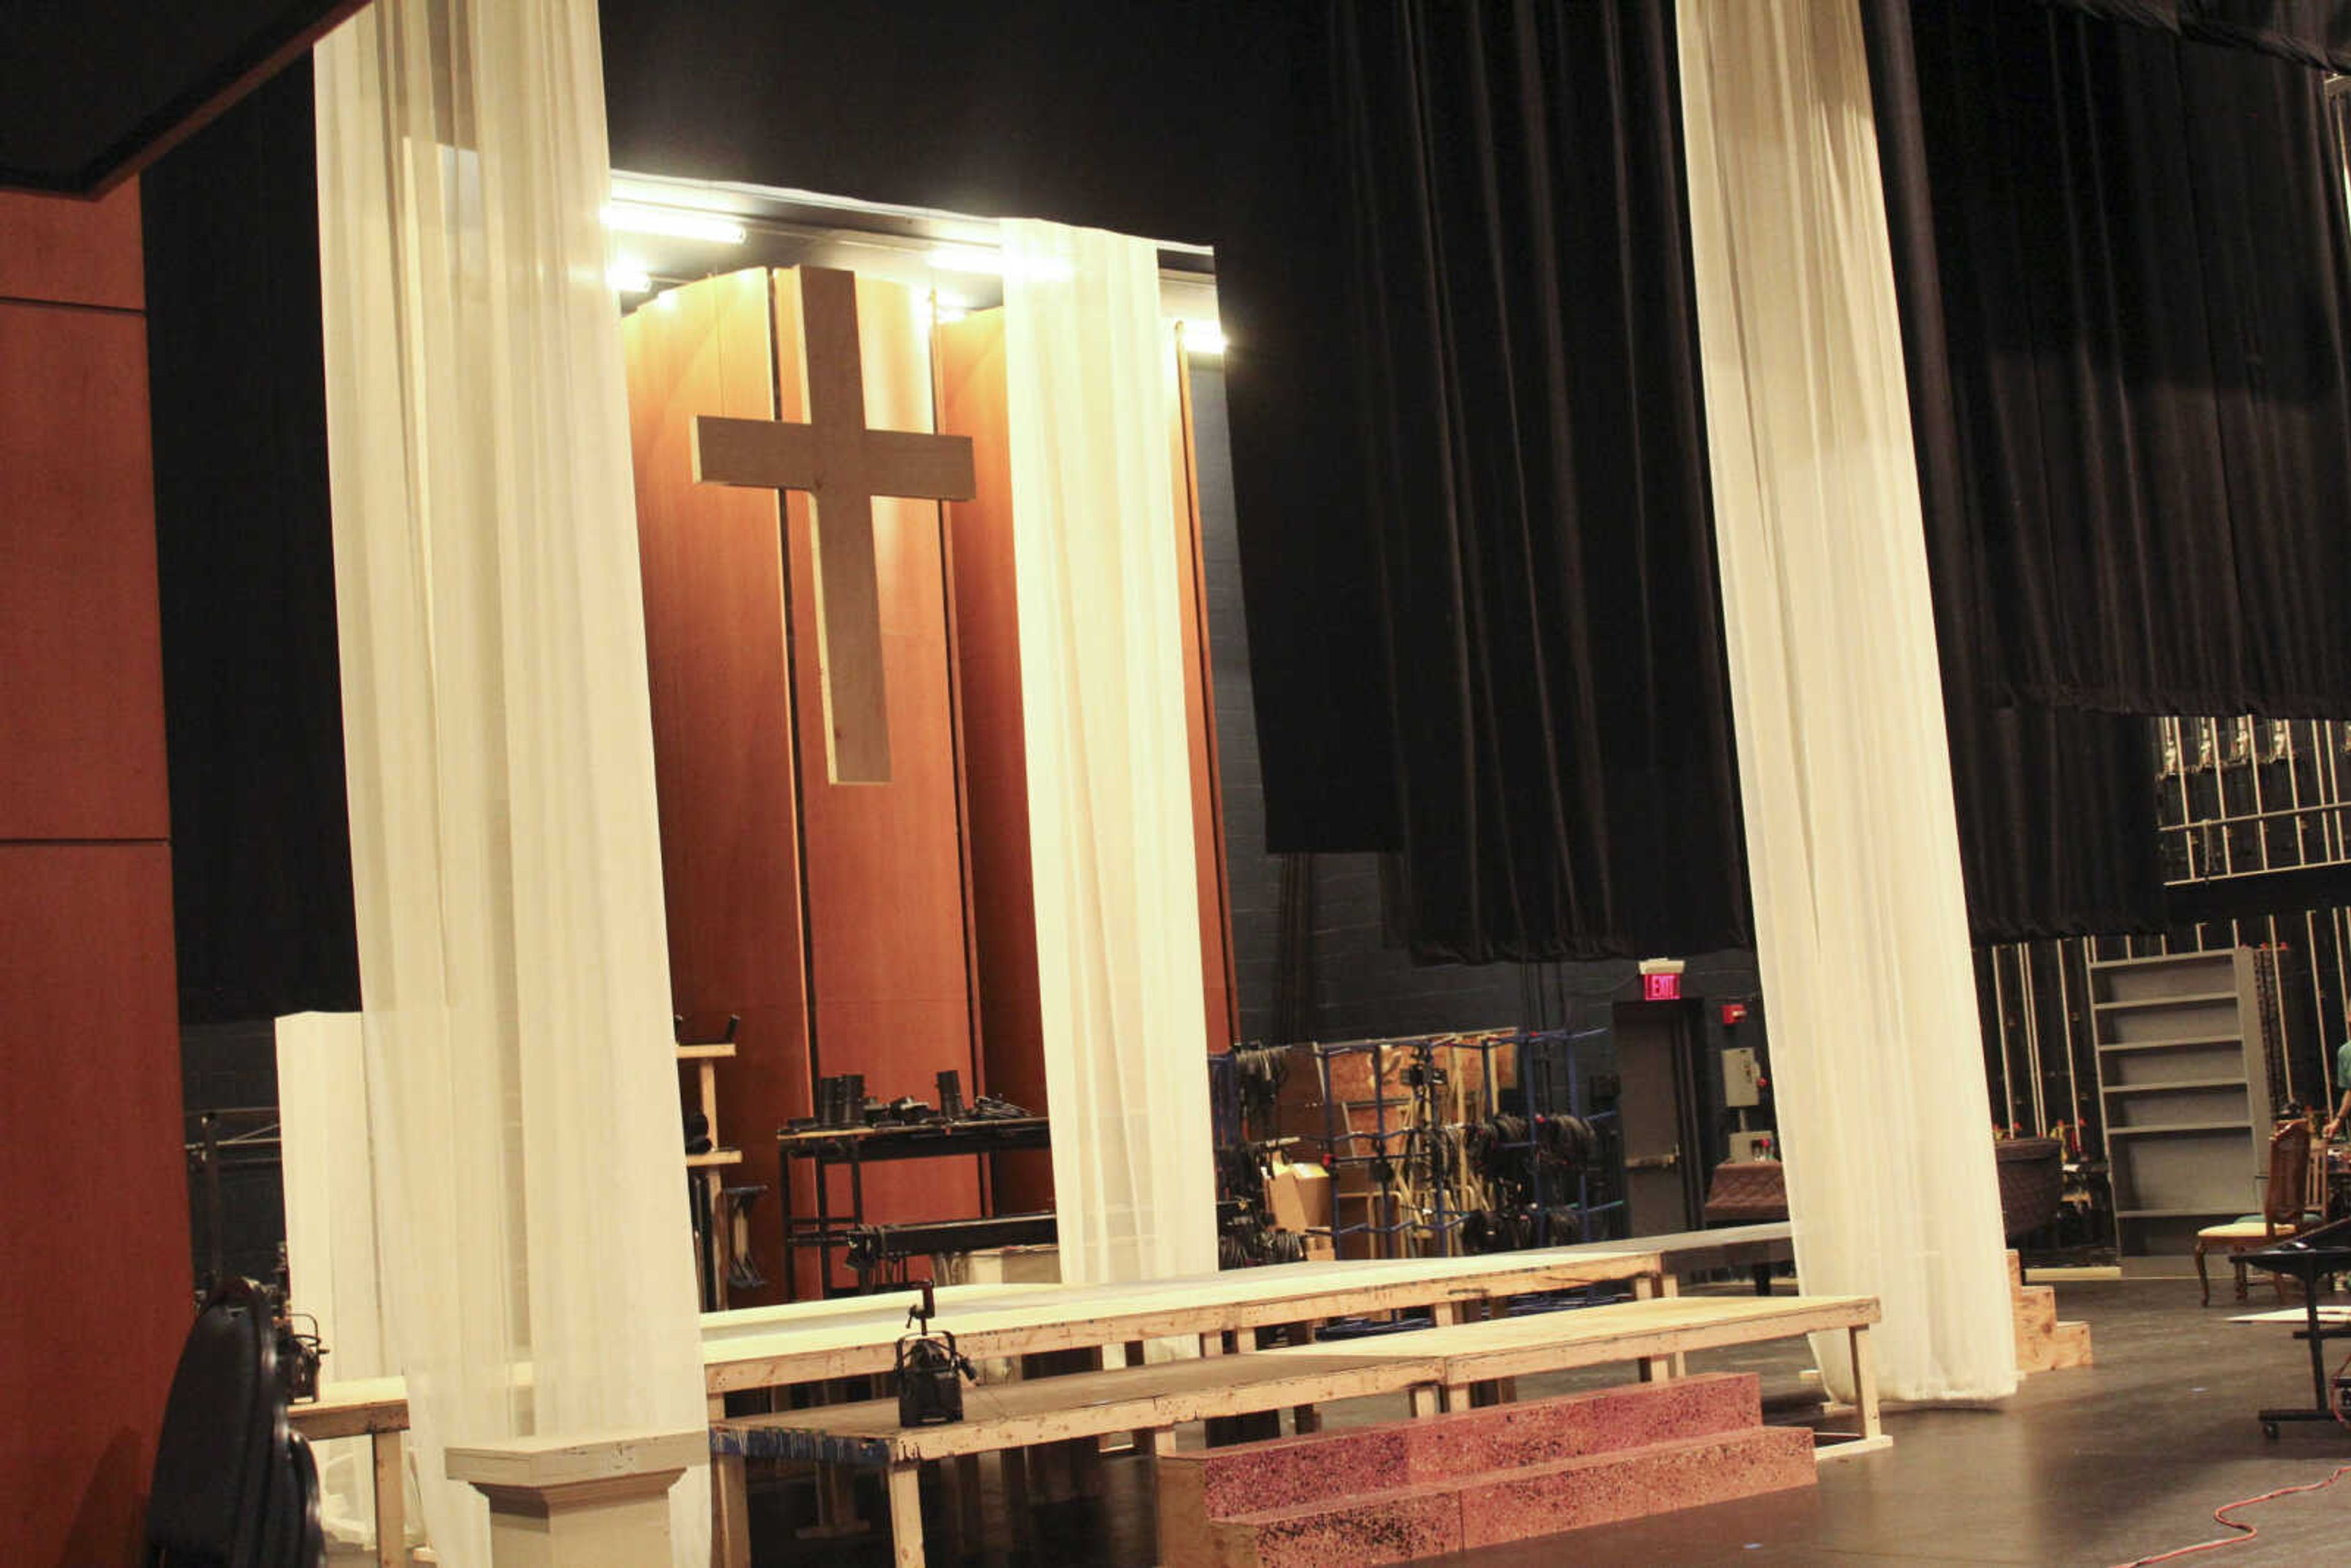 The stage set up for Suor Angelica, the first act of the show as it is set in a Covent. Bedell Performance Hall on Jan. 16, 2020.